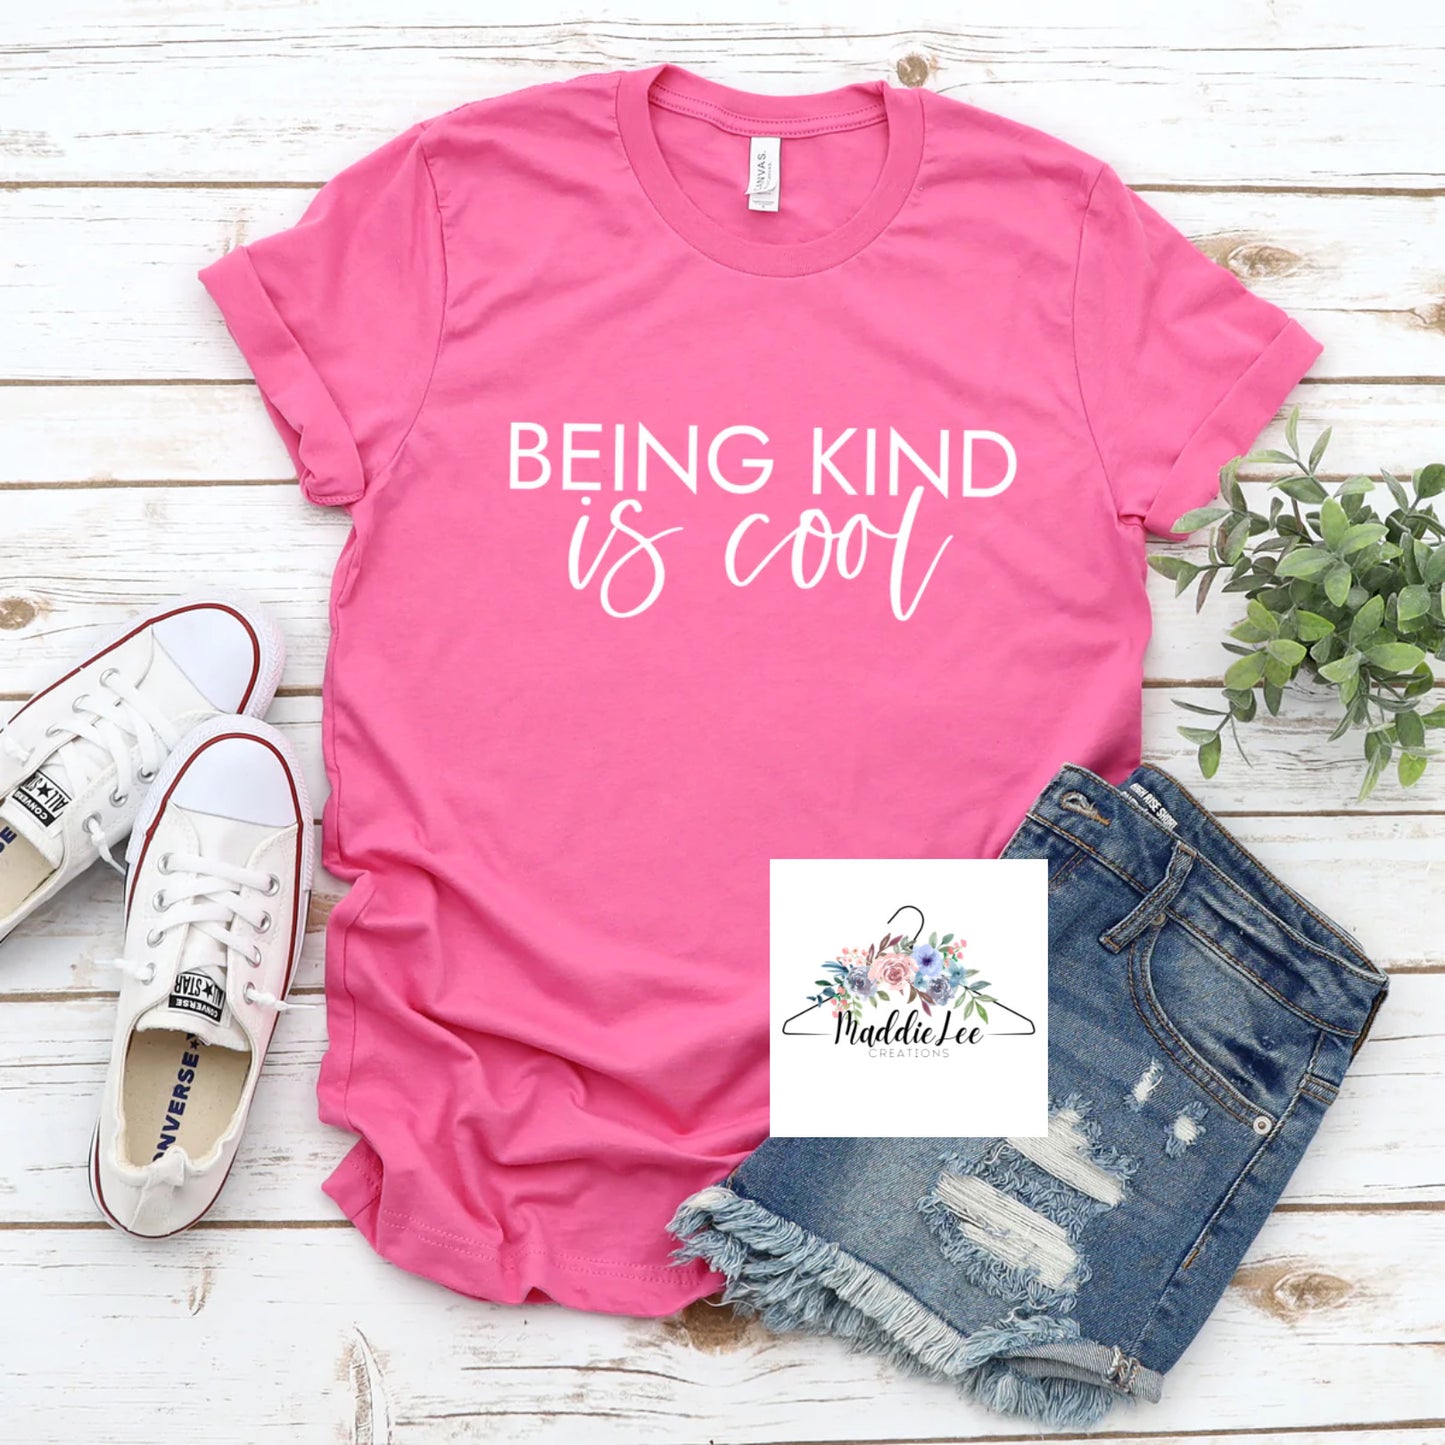 Being Kind is Cool (white) Adult Tee